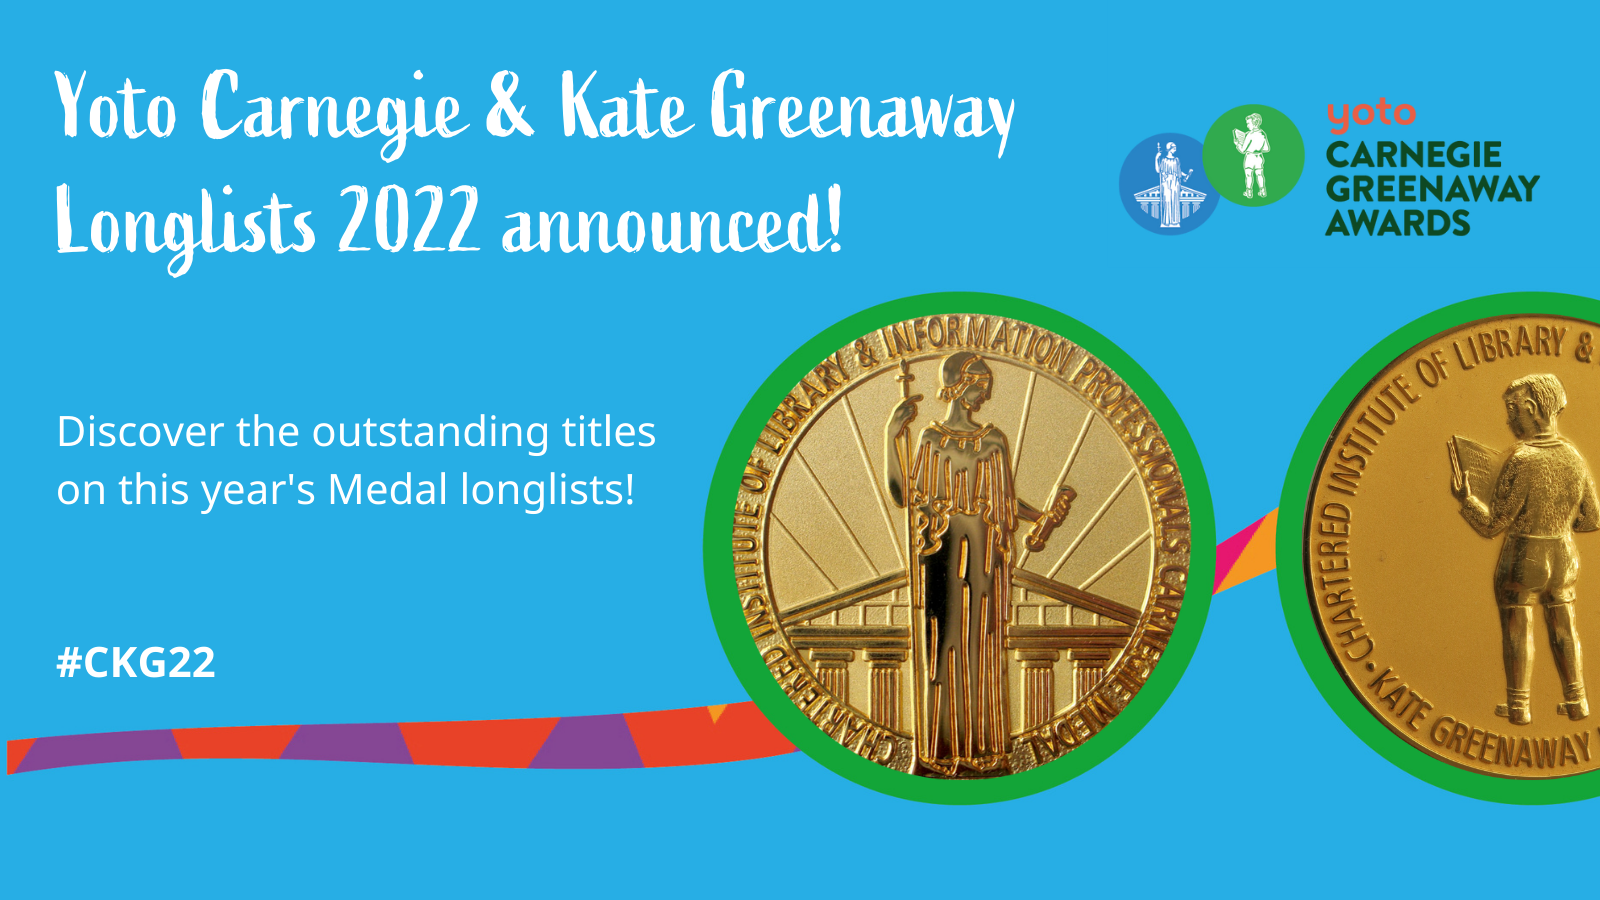 Longlists announced for Yoto Carnegie Greenaway Awards 2022 Peters